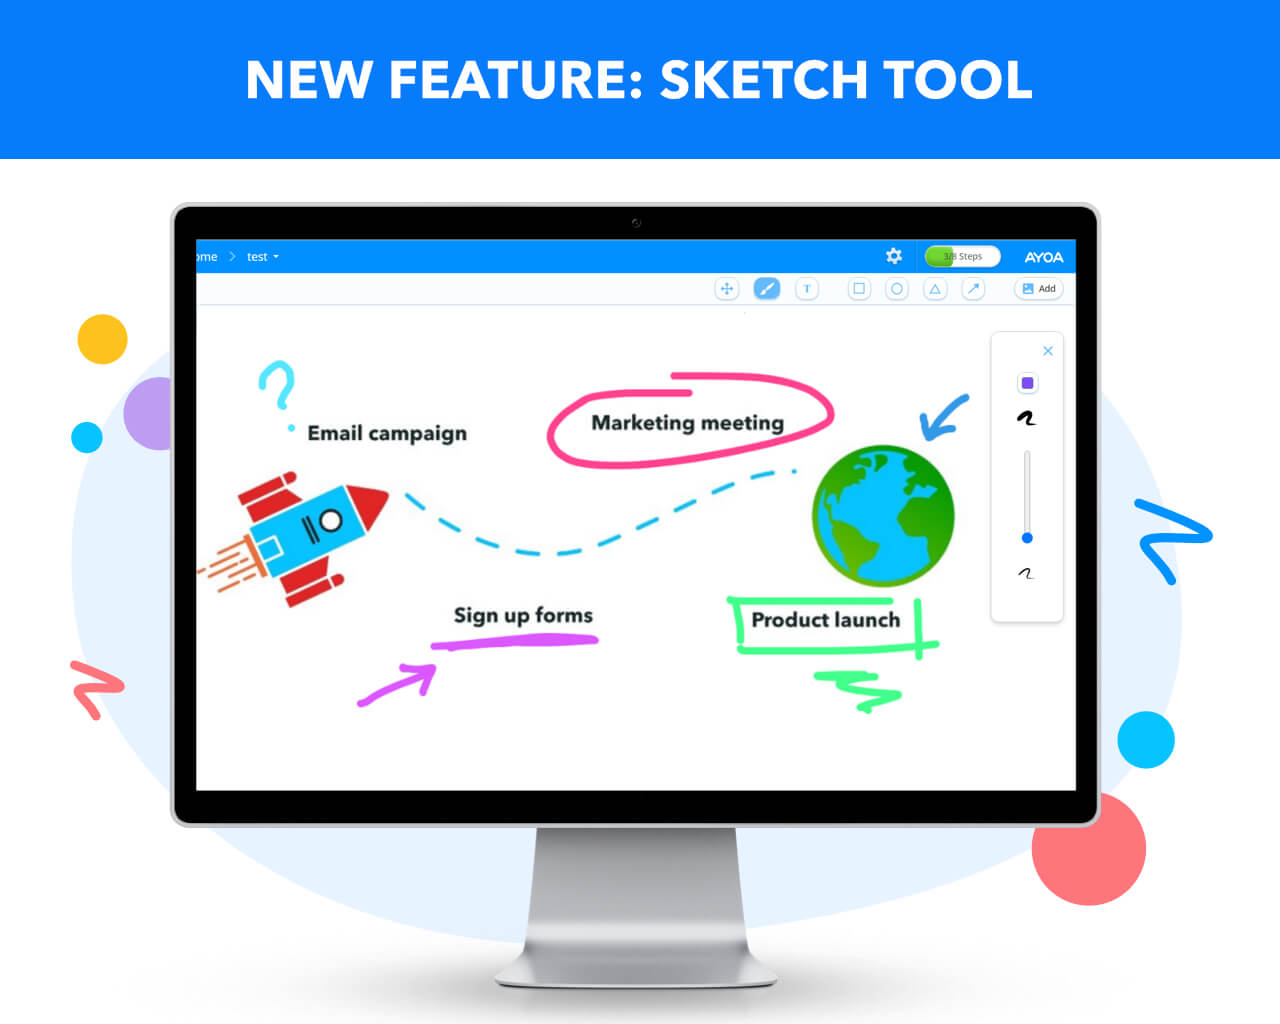 Ayoa | Further customize your task boards and mind maps with our NEW freehand sketch tool!